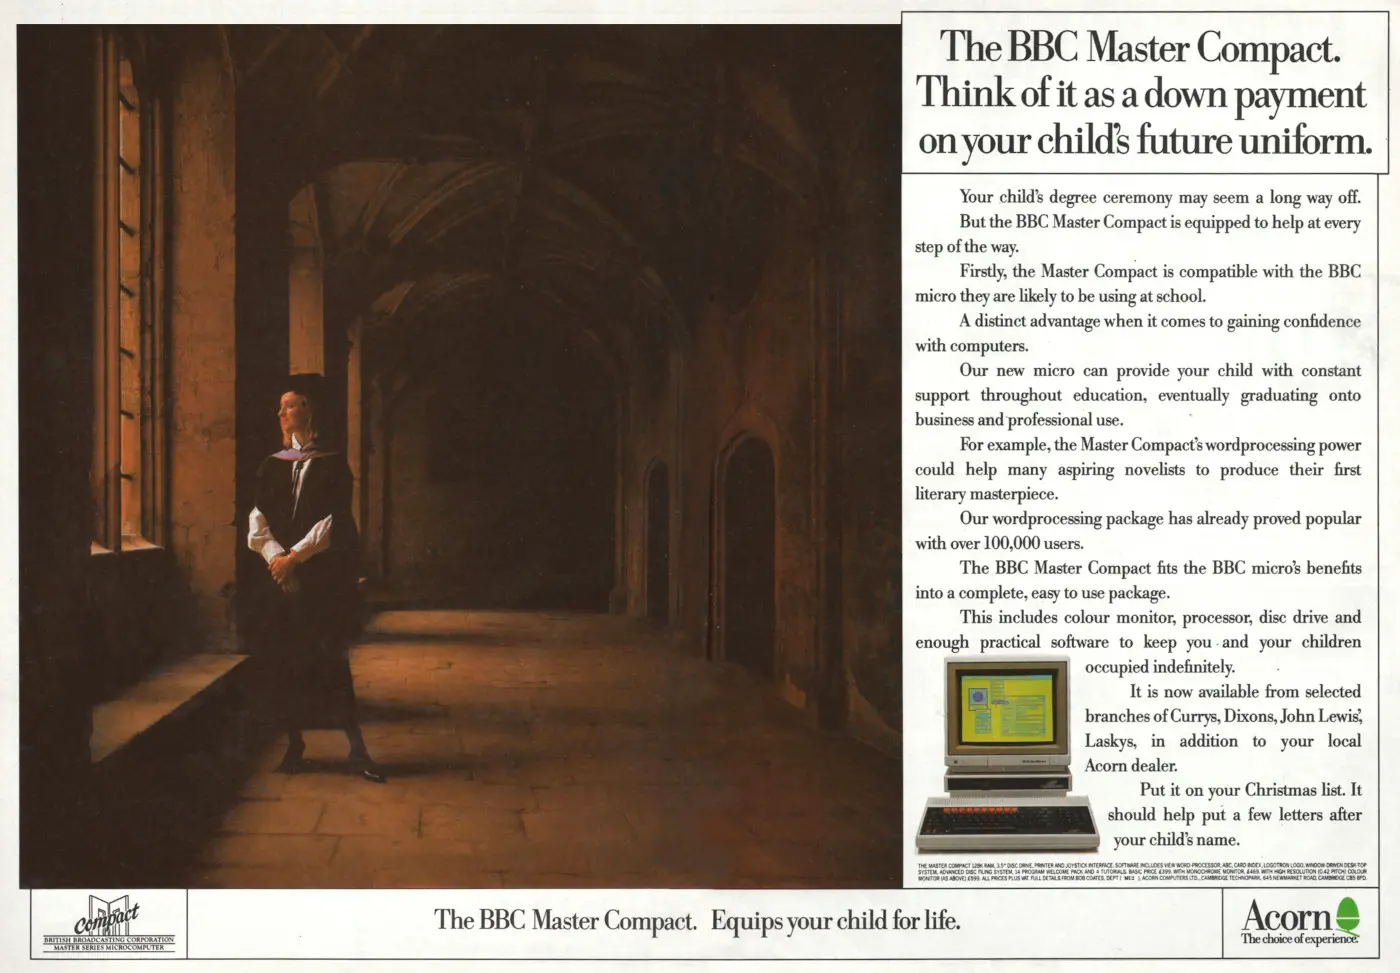 Acorn Advert: The BBC Master Compact: Think of it as a down payment on your child's future uniform, from The Micro User, November 1986